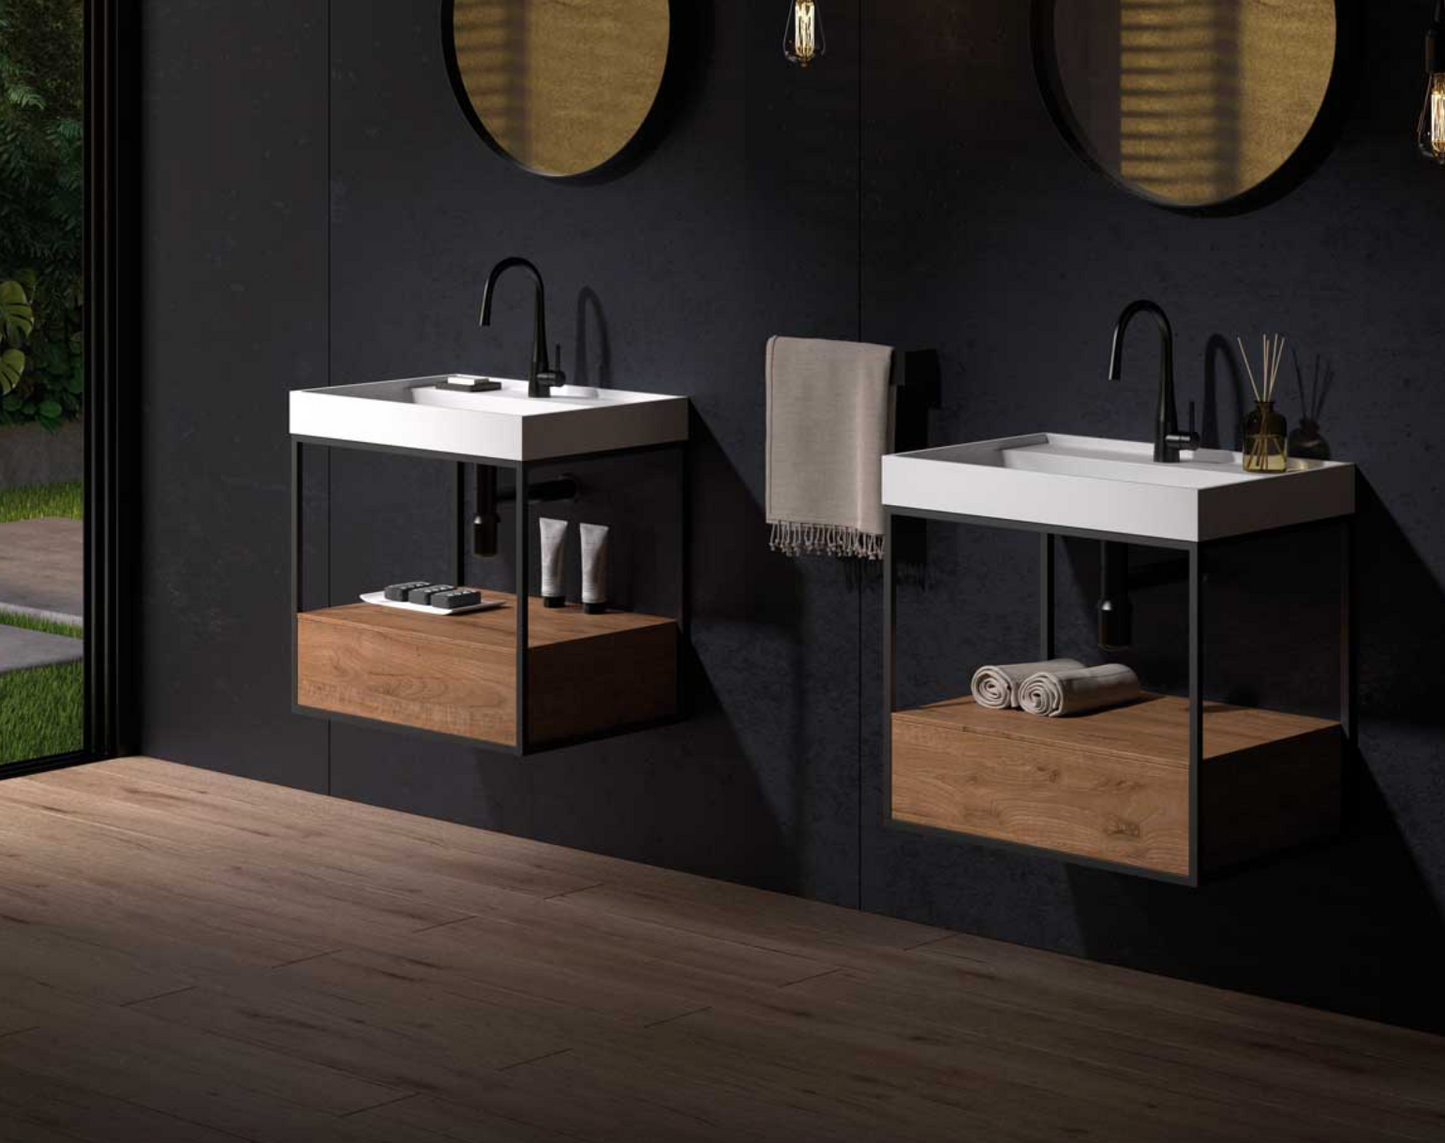 Stoneacril® Tribeca skirted countertop with integrated Madero Atelier washbasin for Tribeca furniture